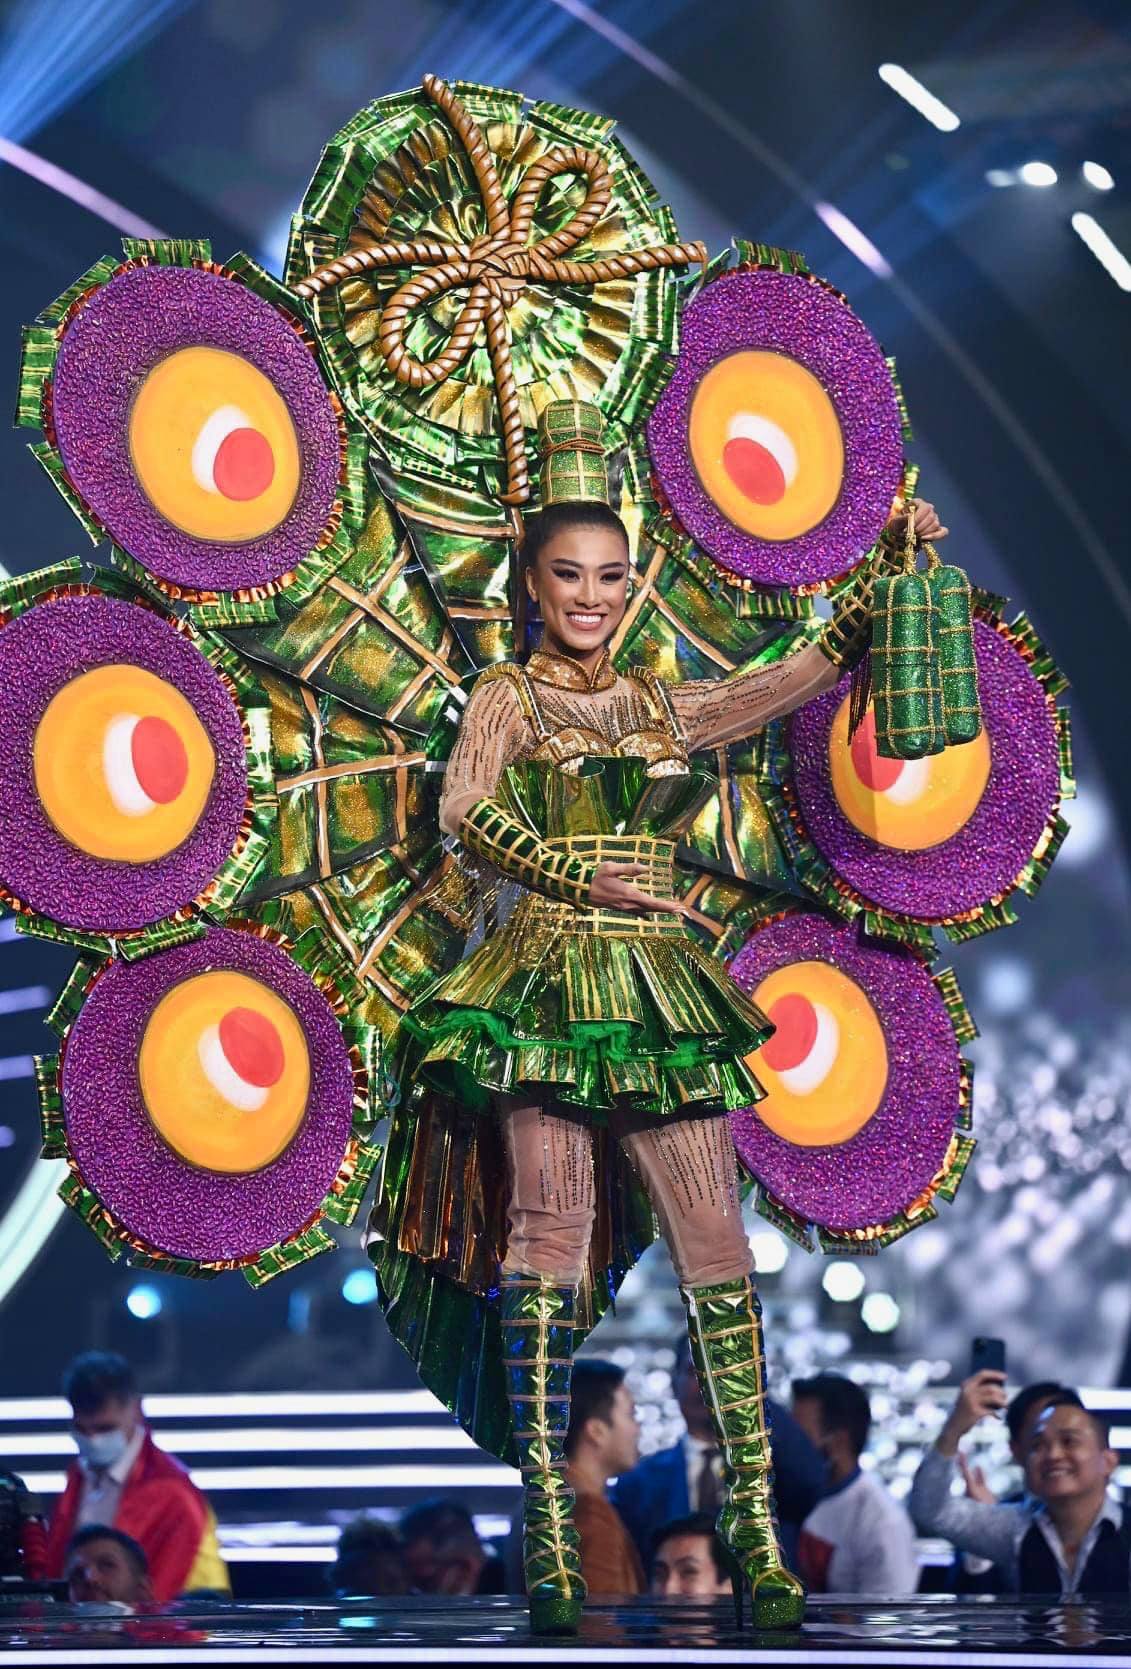 World Beauties Top 5 Best National Costume Of Miss Universe 21 Bt World Beauties Missuniverse21 Missunivese Nationalcostume T Co K7mtornkpd Twitter